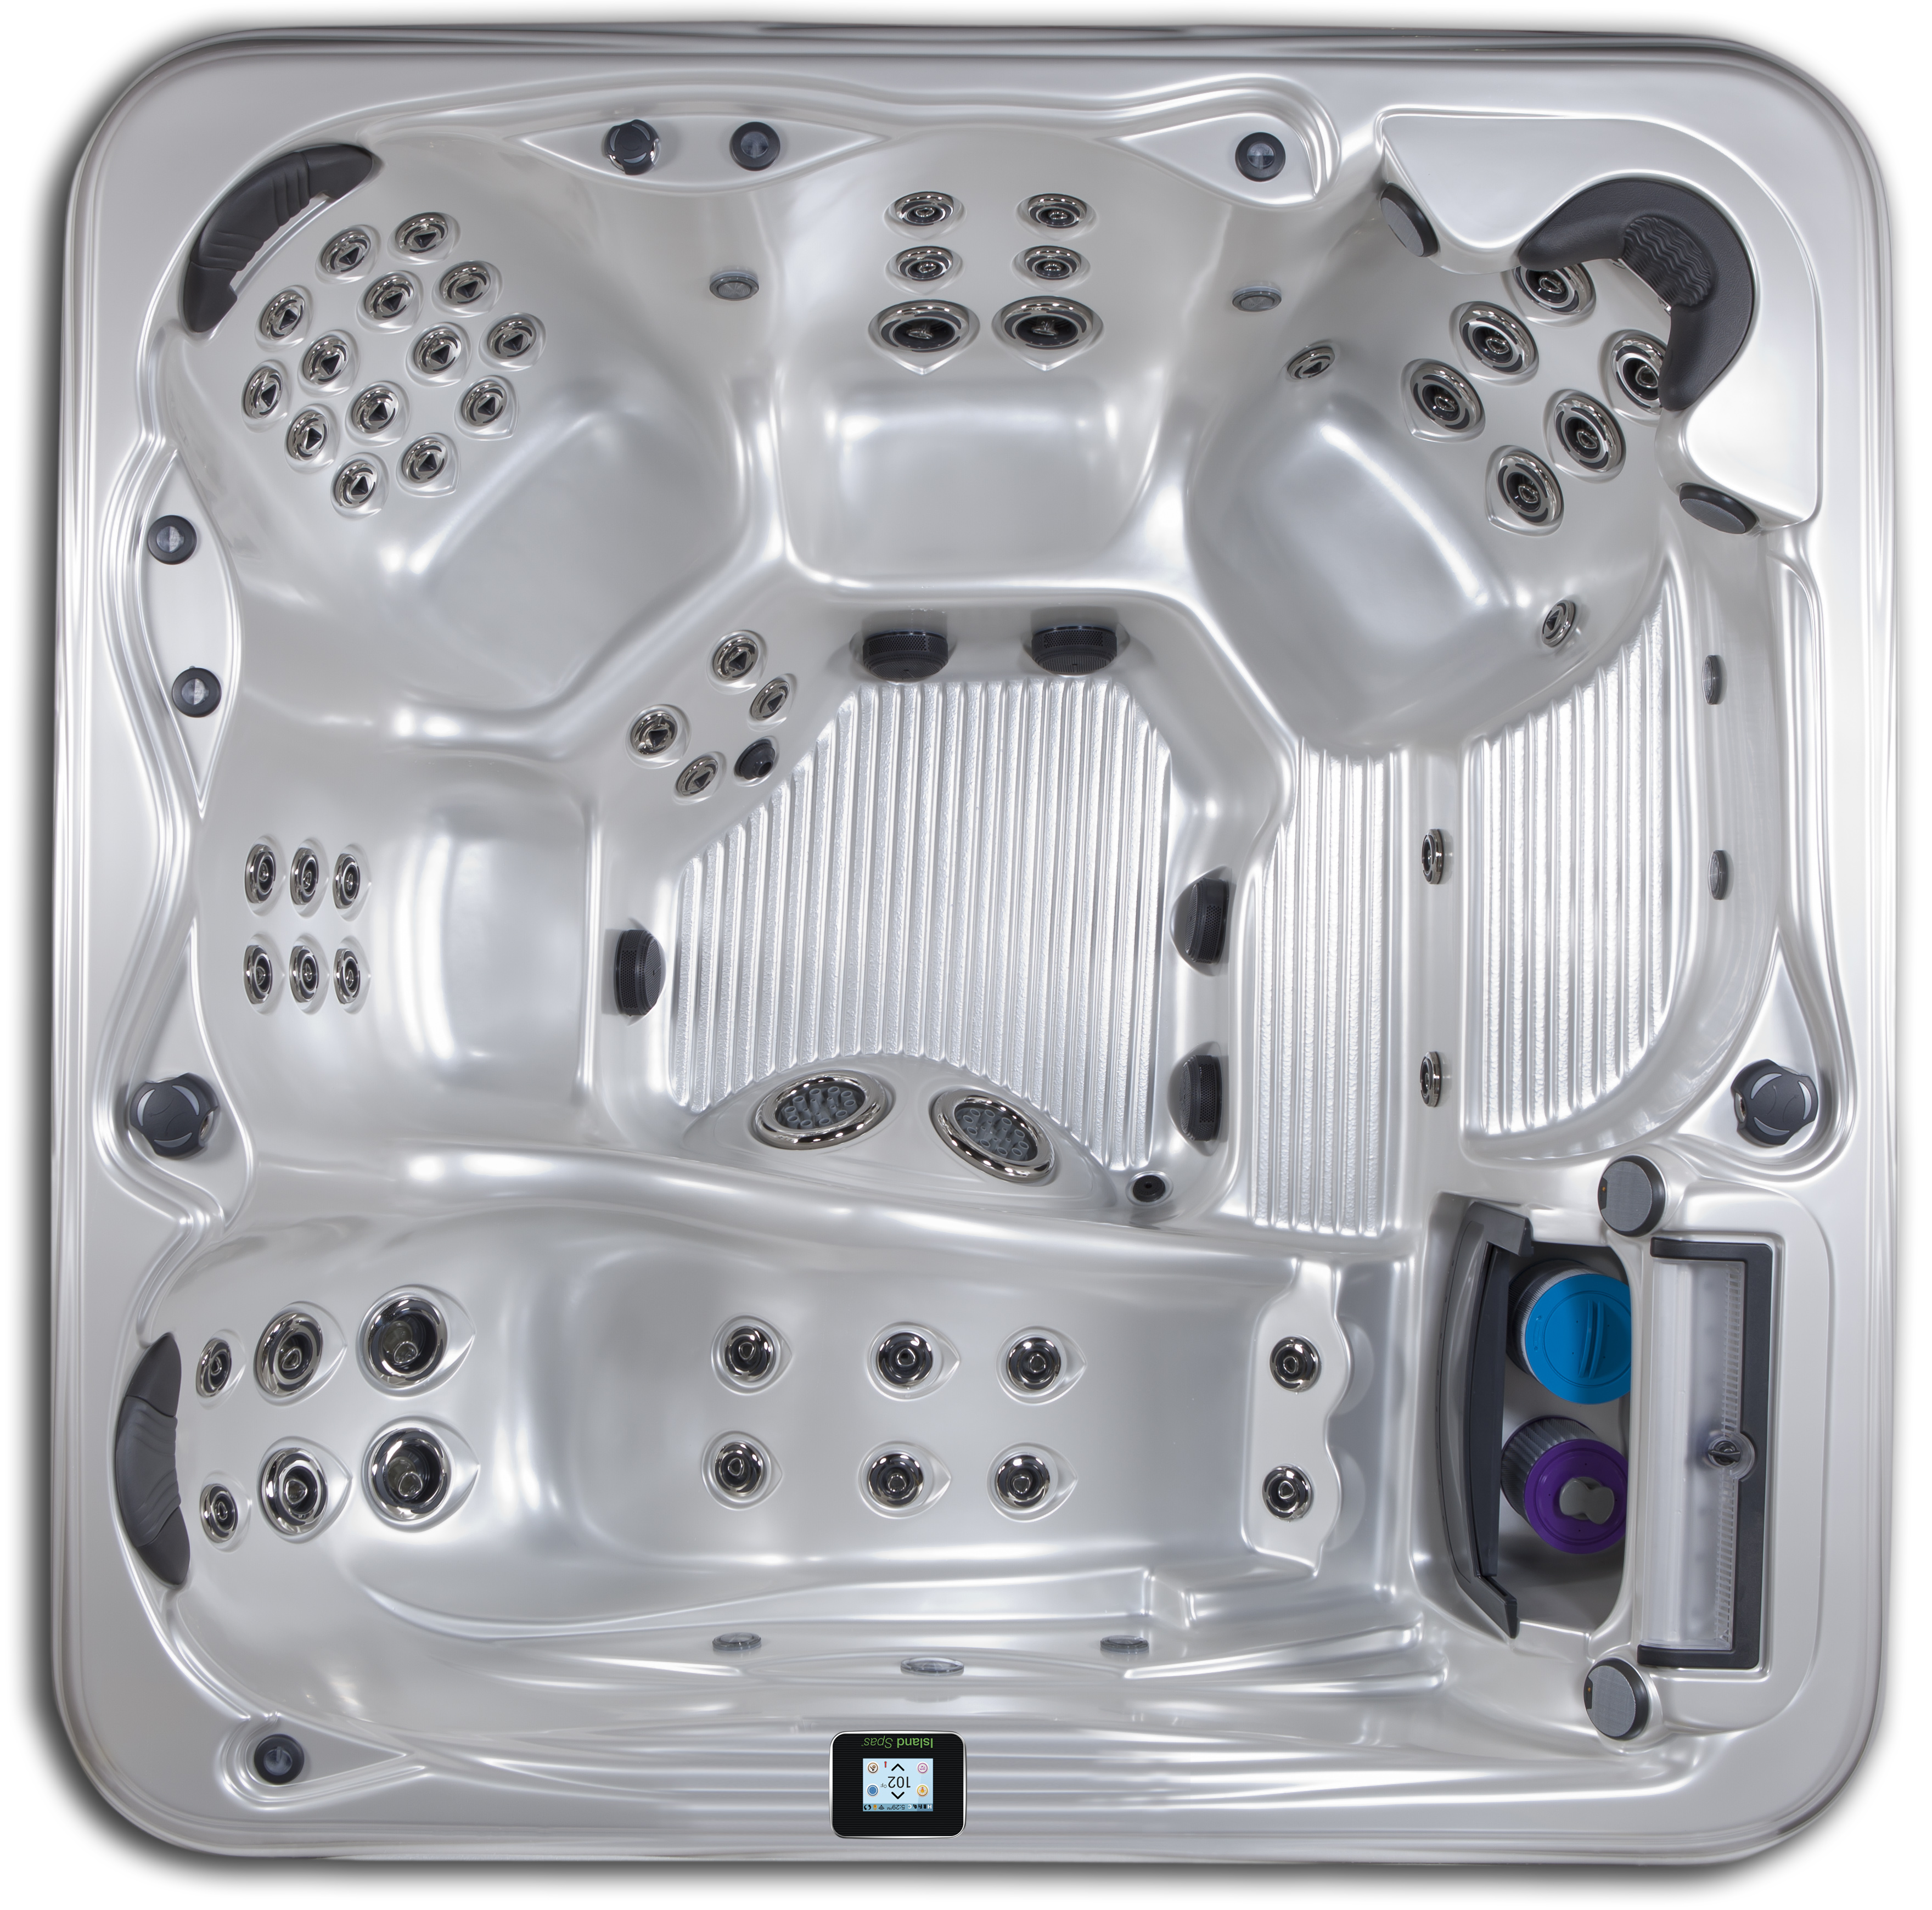 Grand Bahama hot tub with 6 seats and up to 62 jets